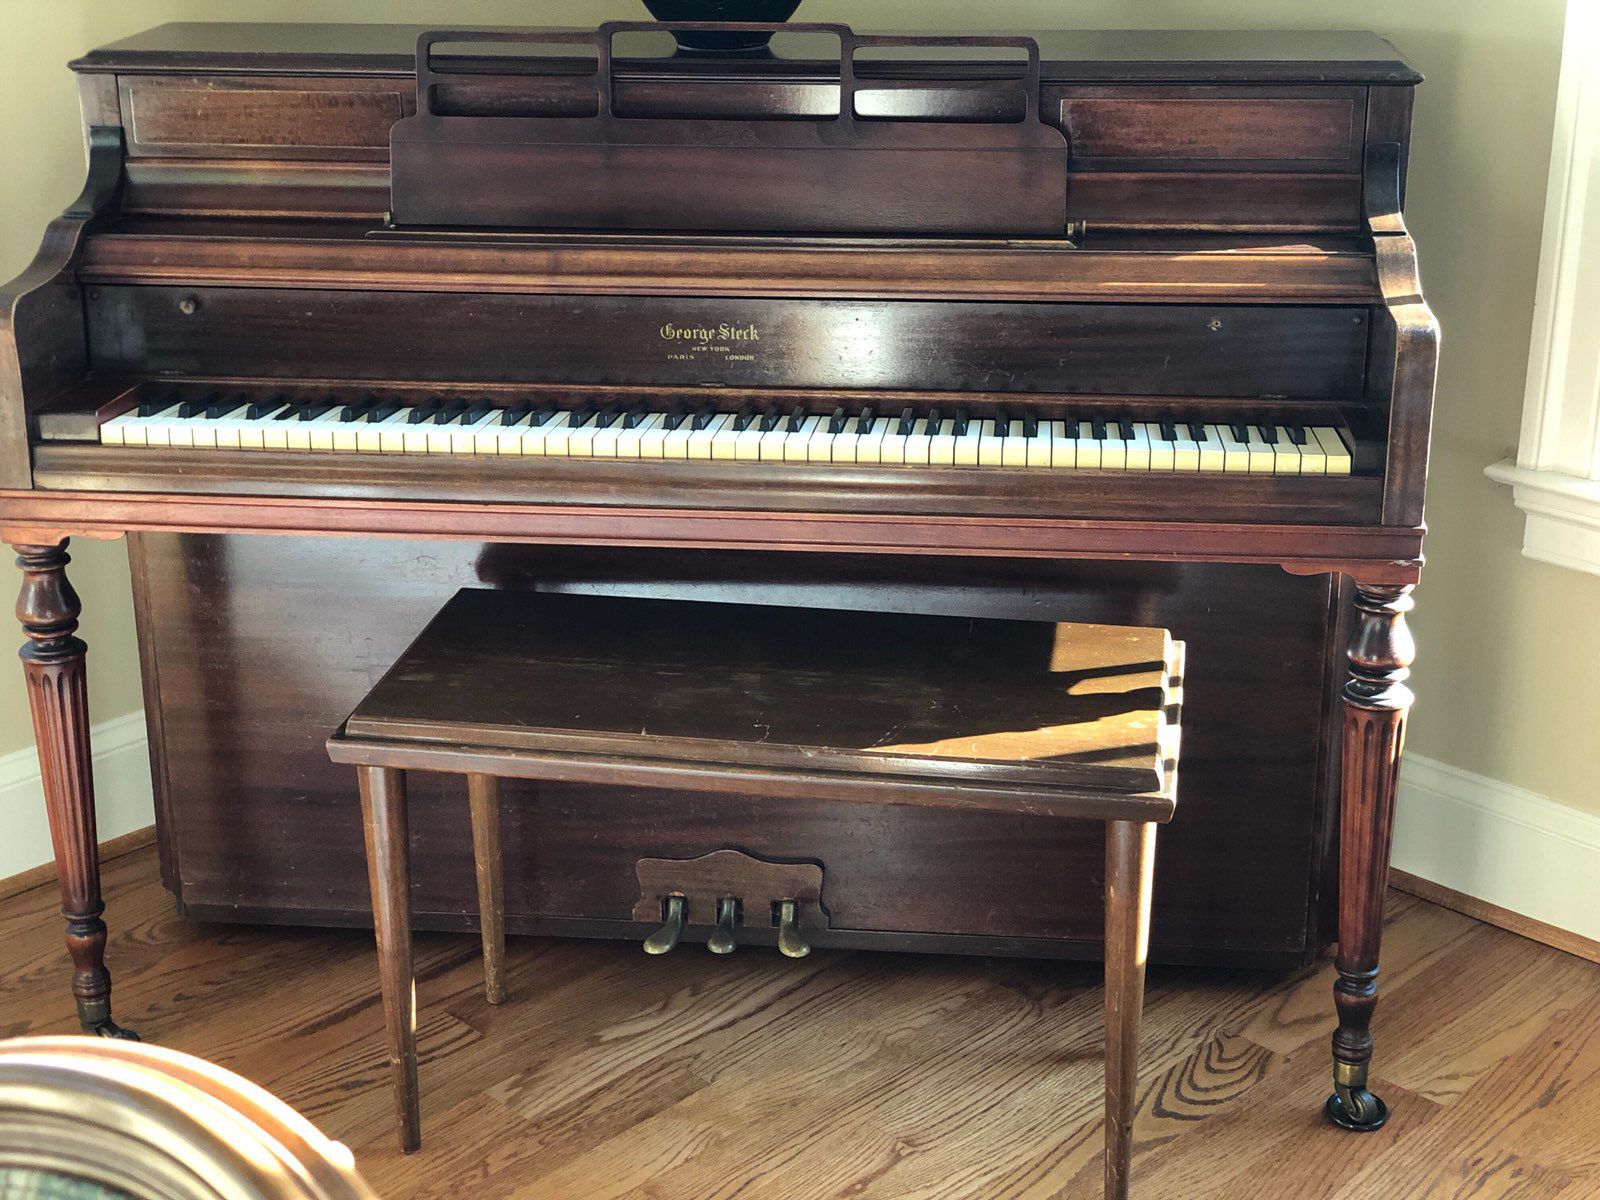 George Steck antique upright piano likely 68 years old or more